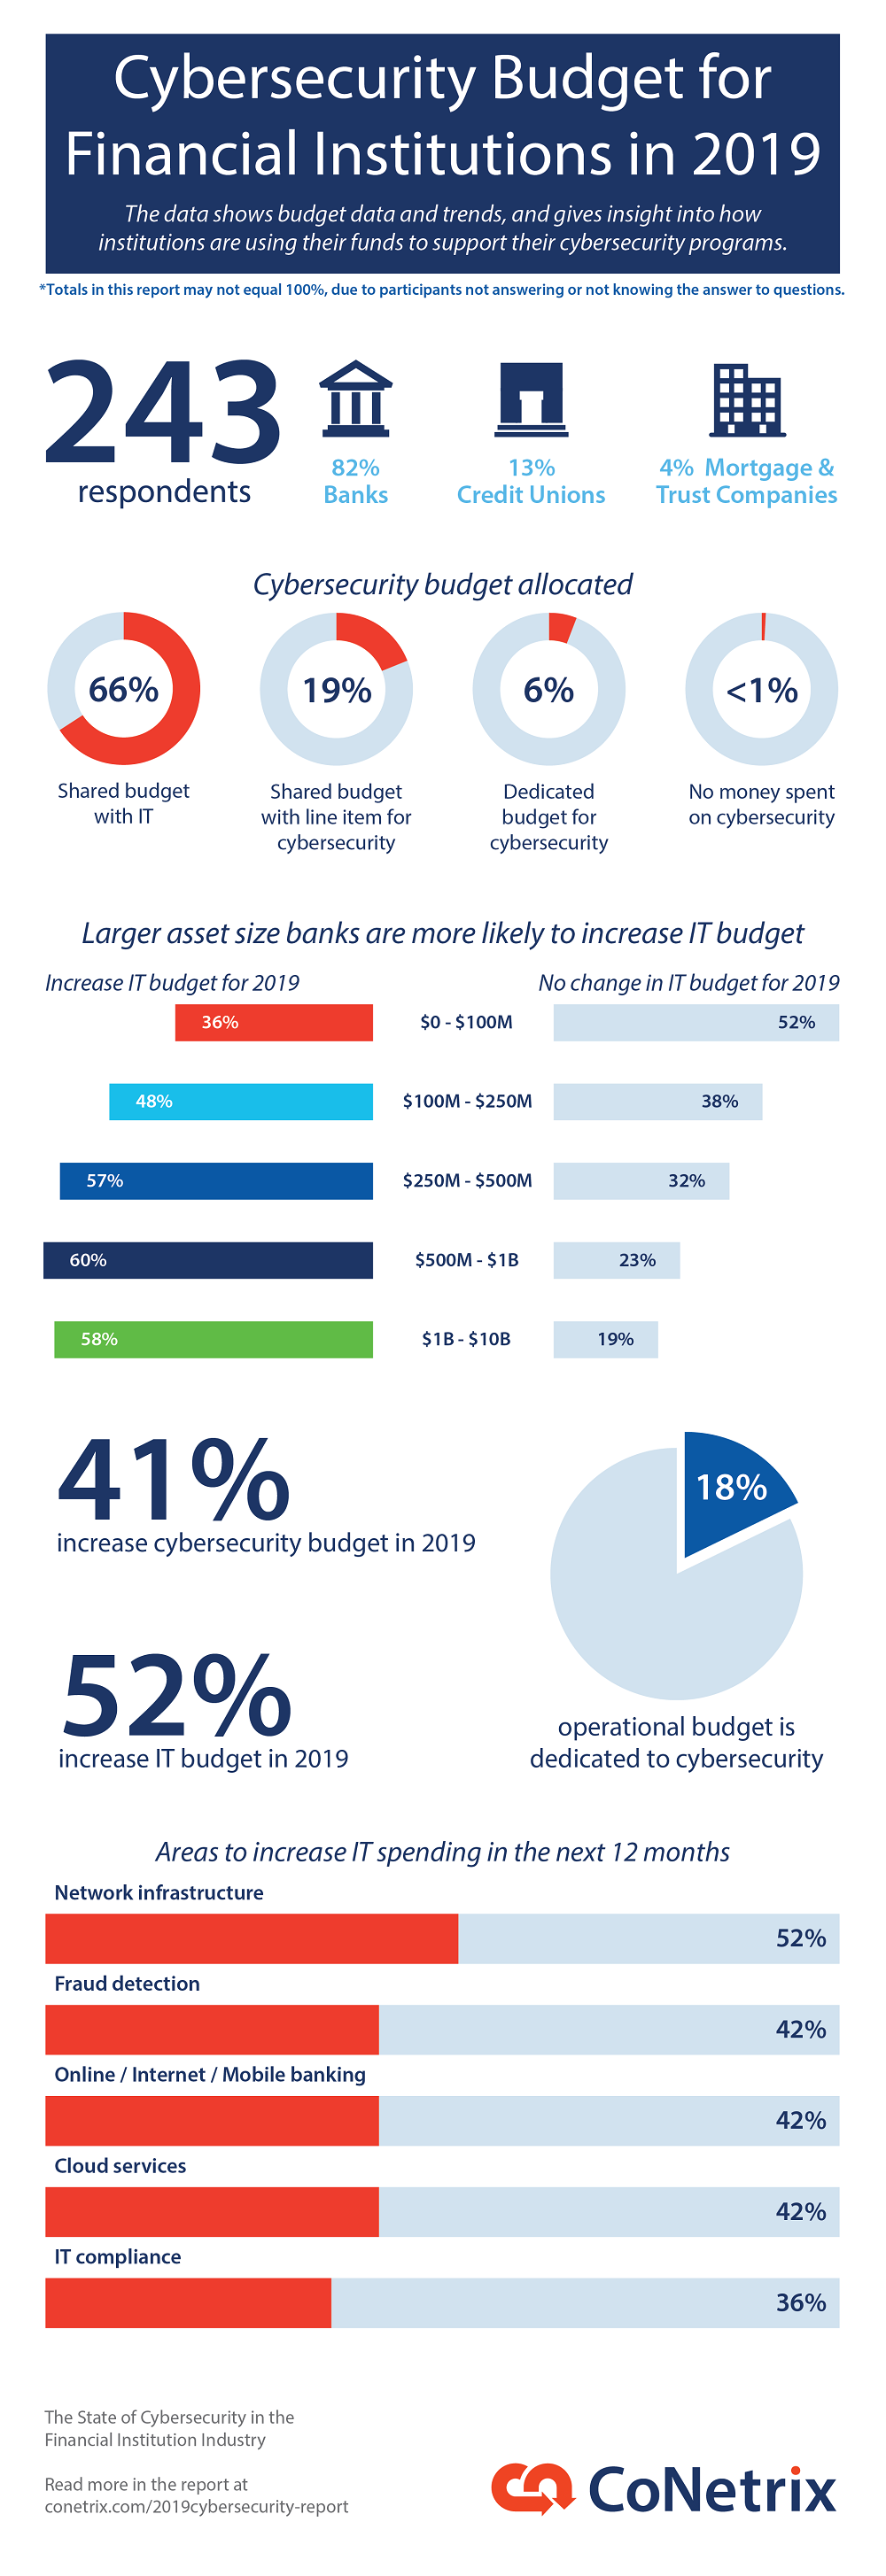 Cybersecurity Budget for Financial Institutions 